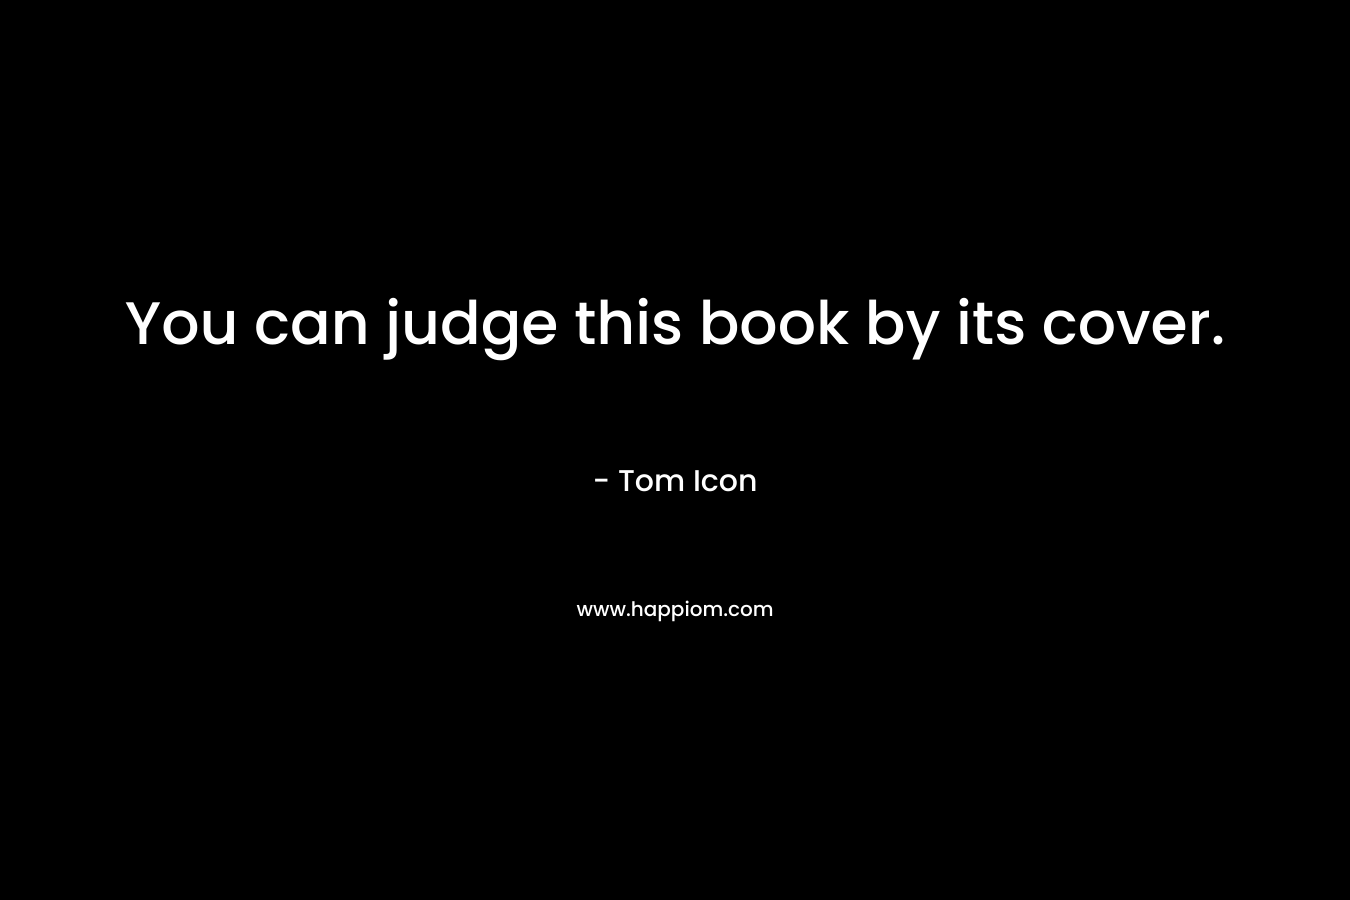 You can judge this book by its cover. – Tom Icon